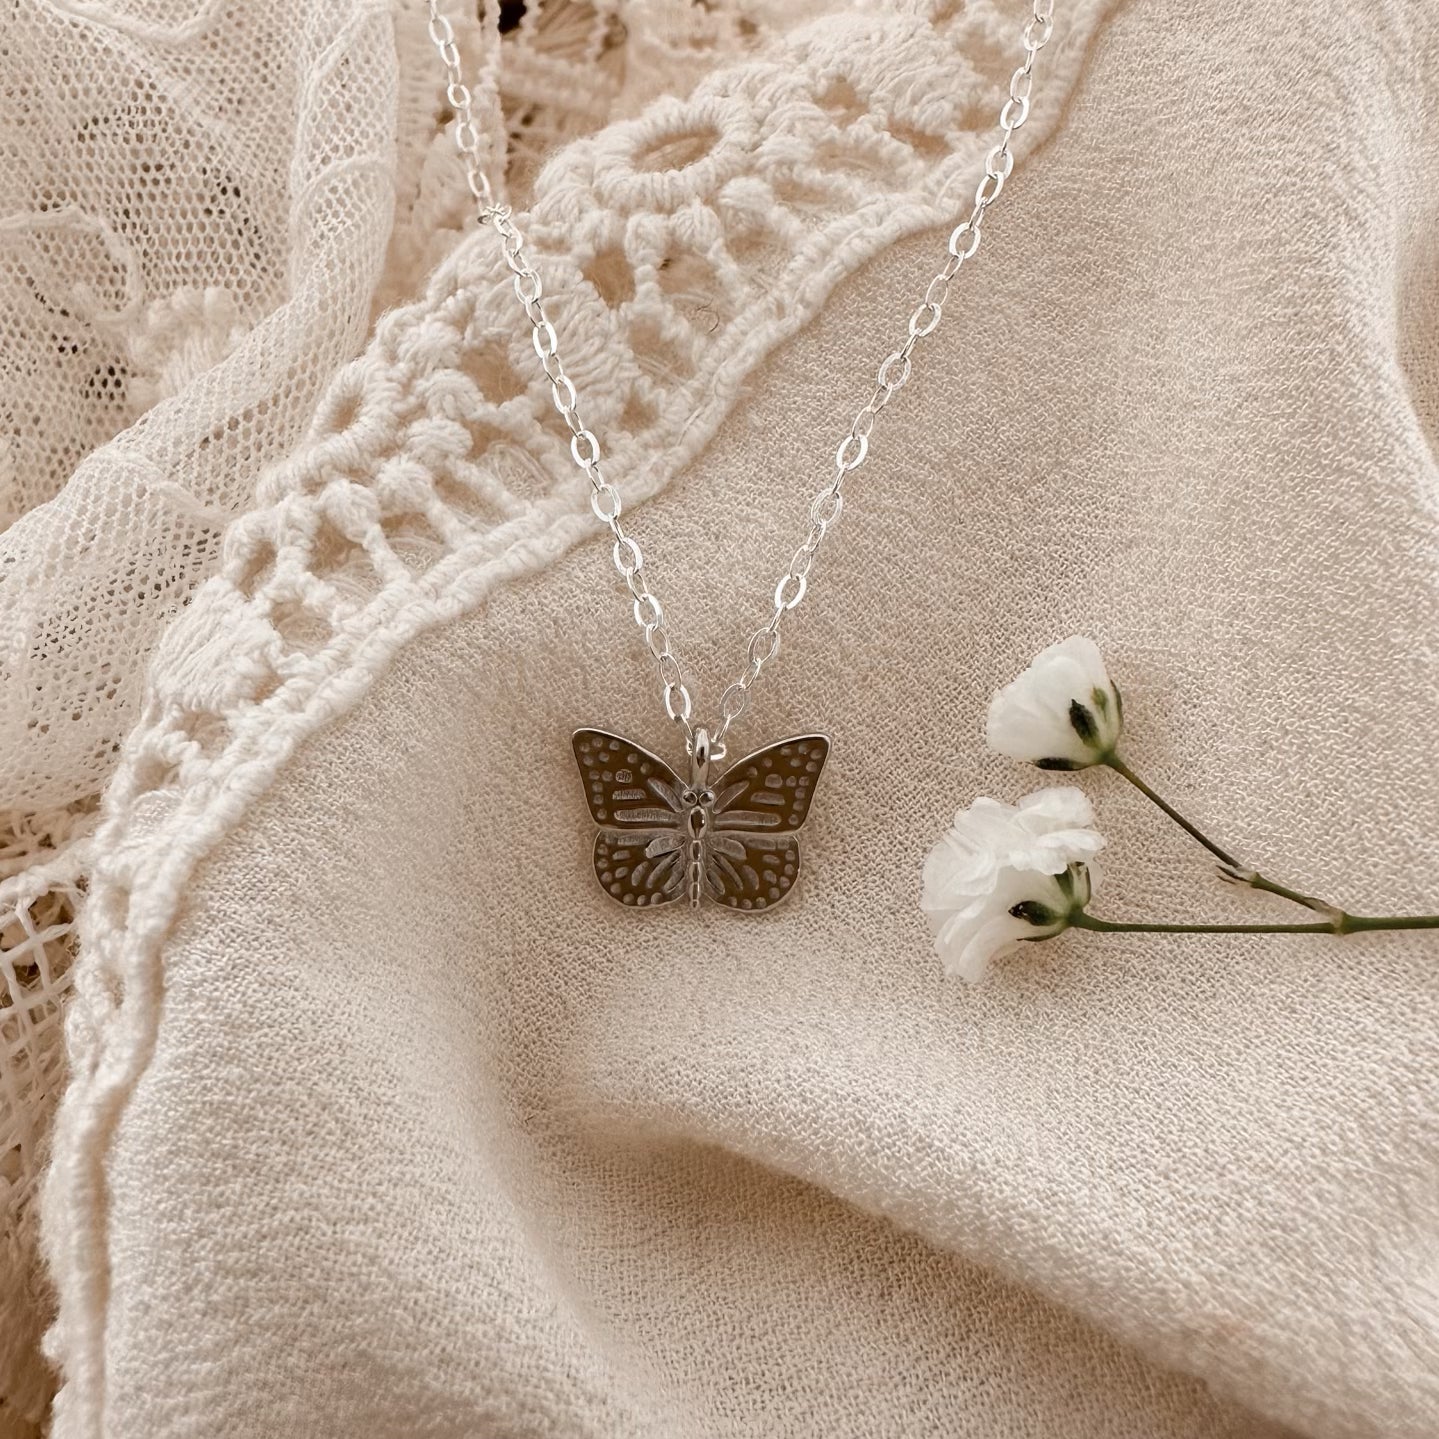 Monarch butterfly necklace - silver